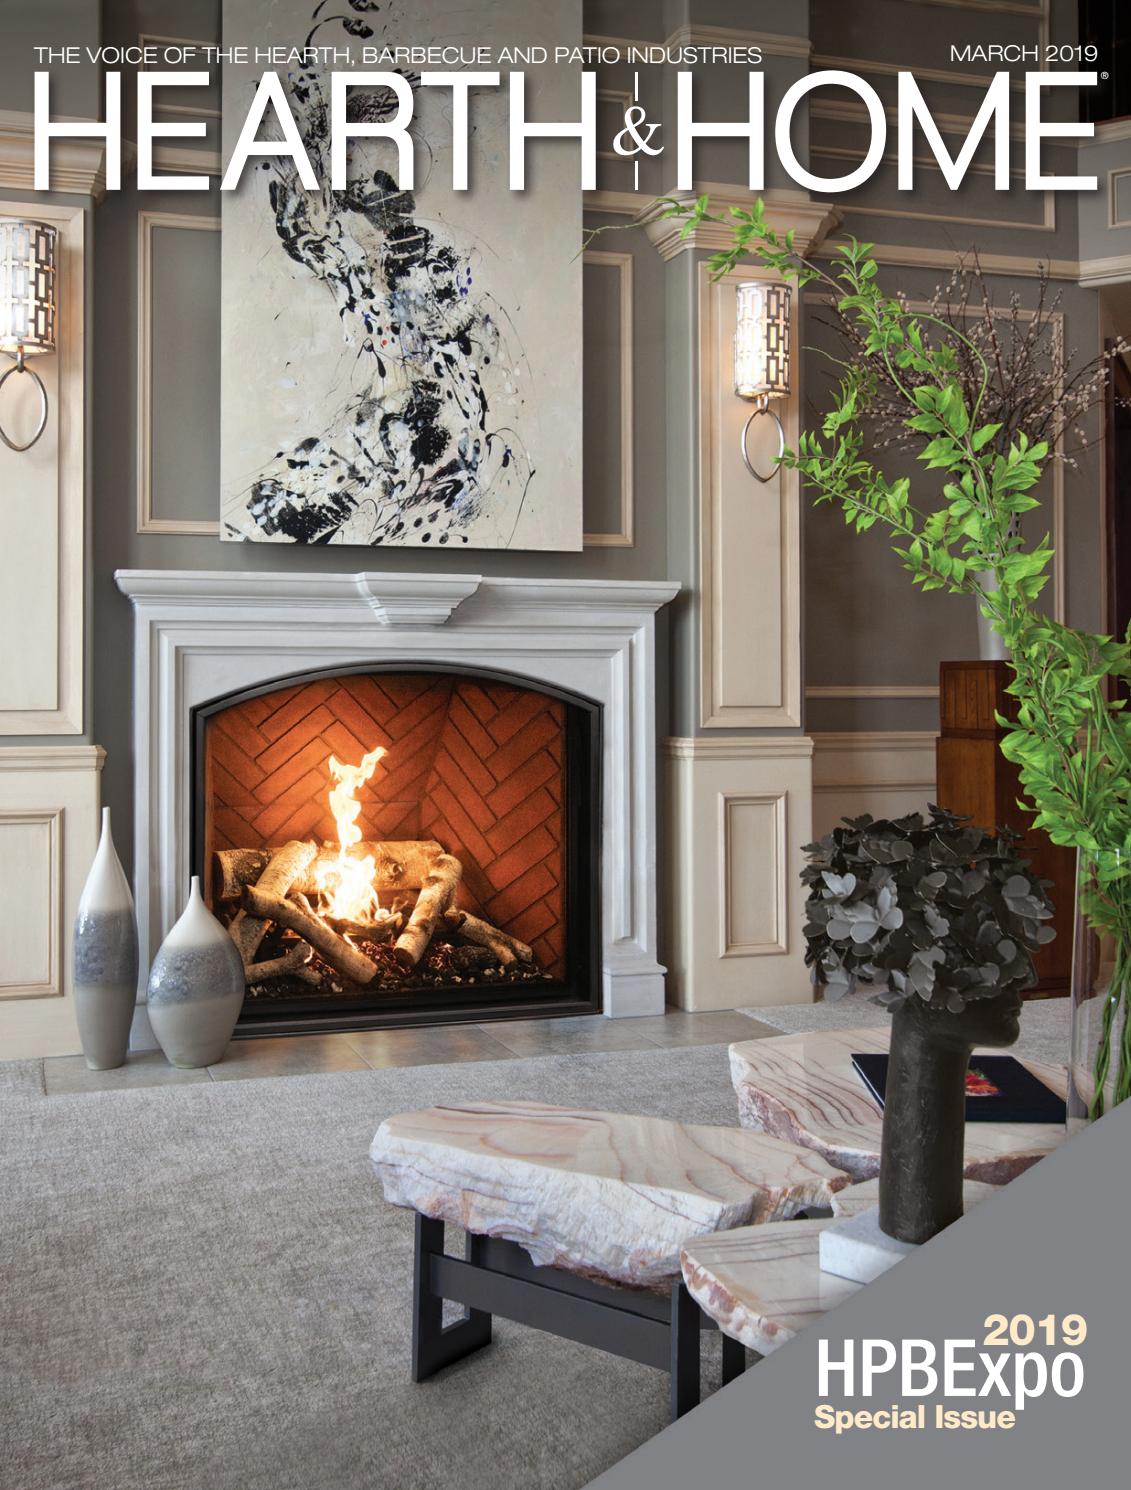 36 Inch Fireplace Insert Lovely Hearth & Home Magazine – 2019 March issue by Hearth & Home